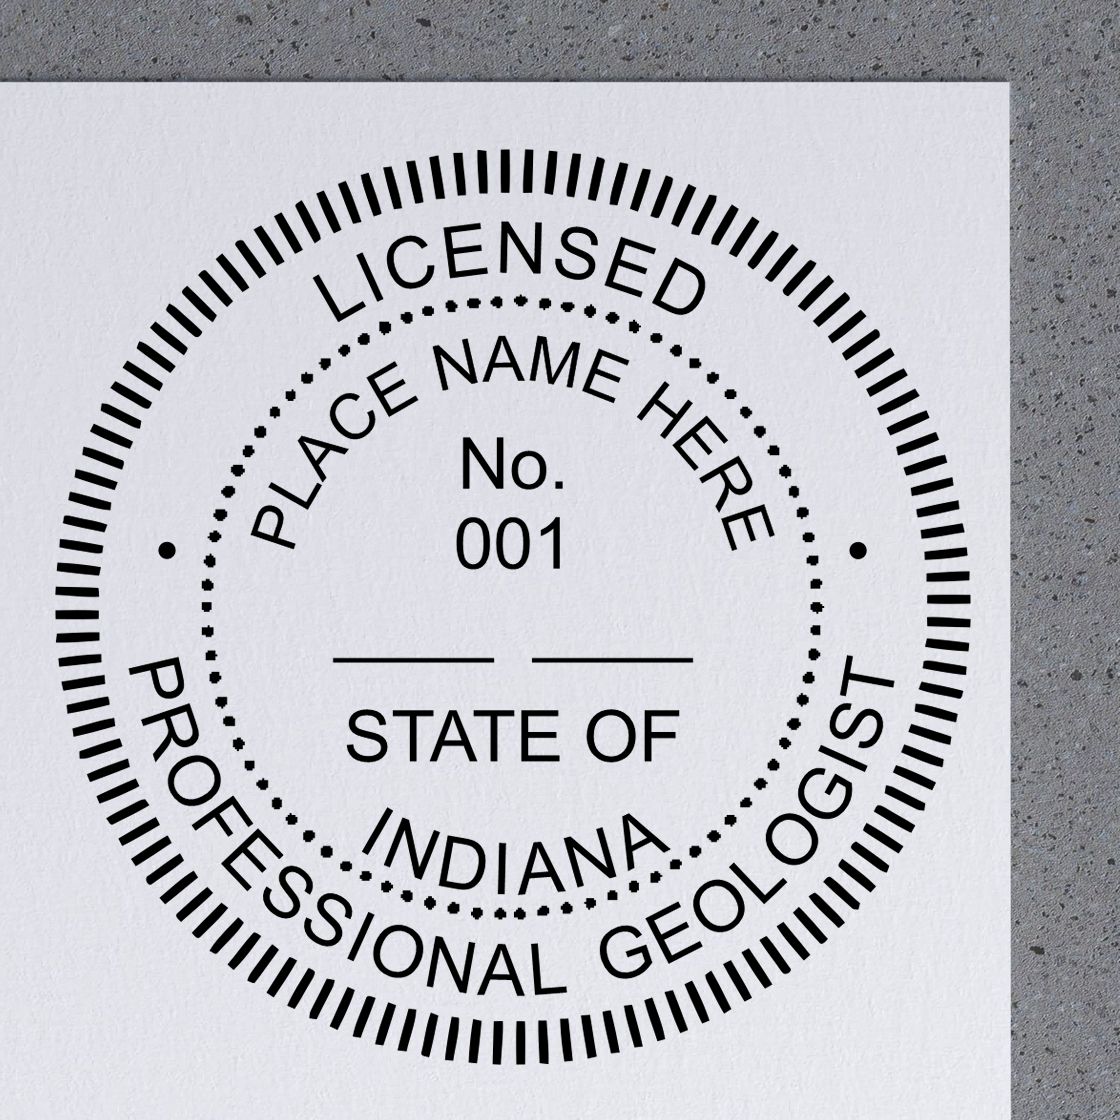 The Indiana Professional Geologist Seal Stamp stamp impression comes to life with a crisp, detailed image stamped on paper - showcasing true professional quality.